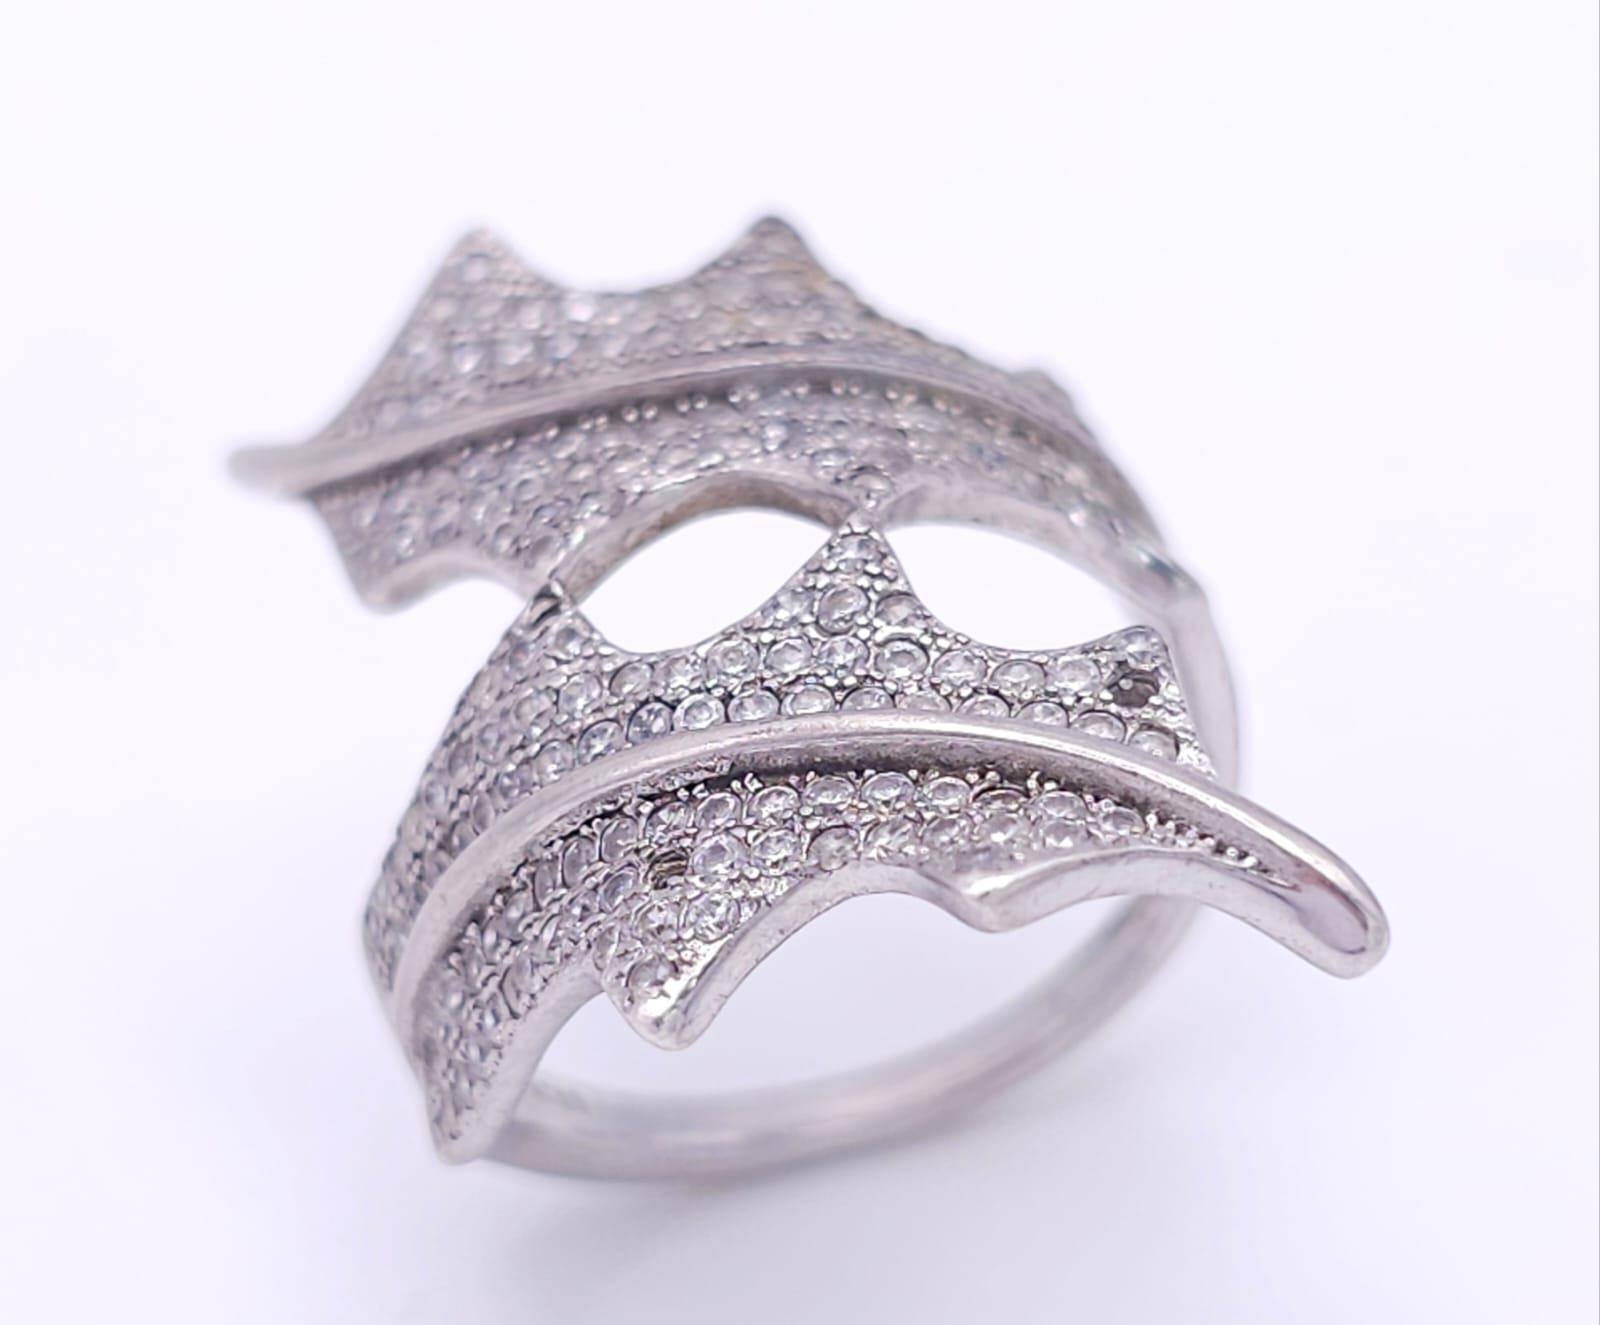 Three Different Style Fancy Sterling Silver Rings - 2 x P, 1 x N. 21.2g total weight. Ref: 016551. - Image 8 of 19